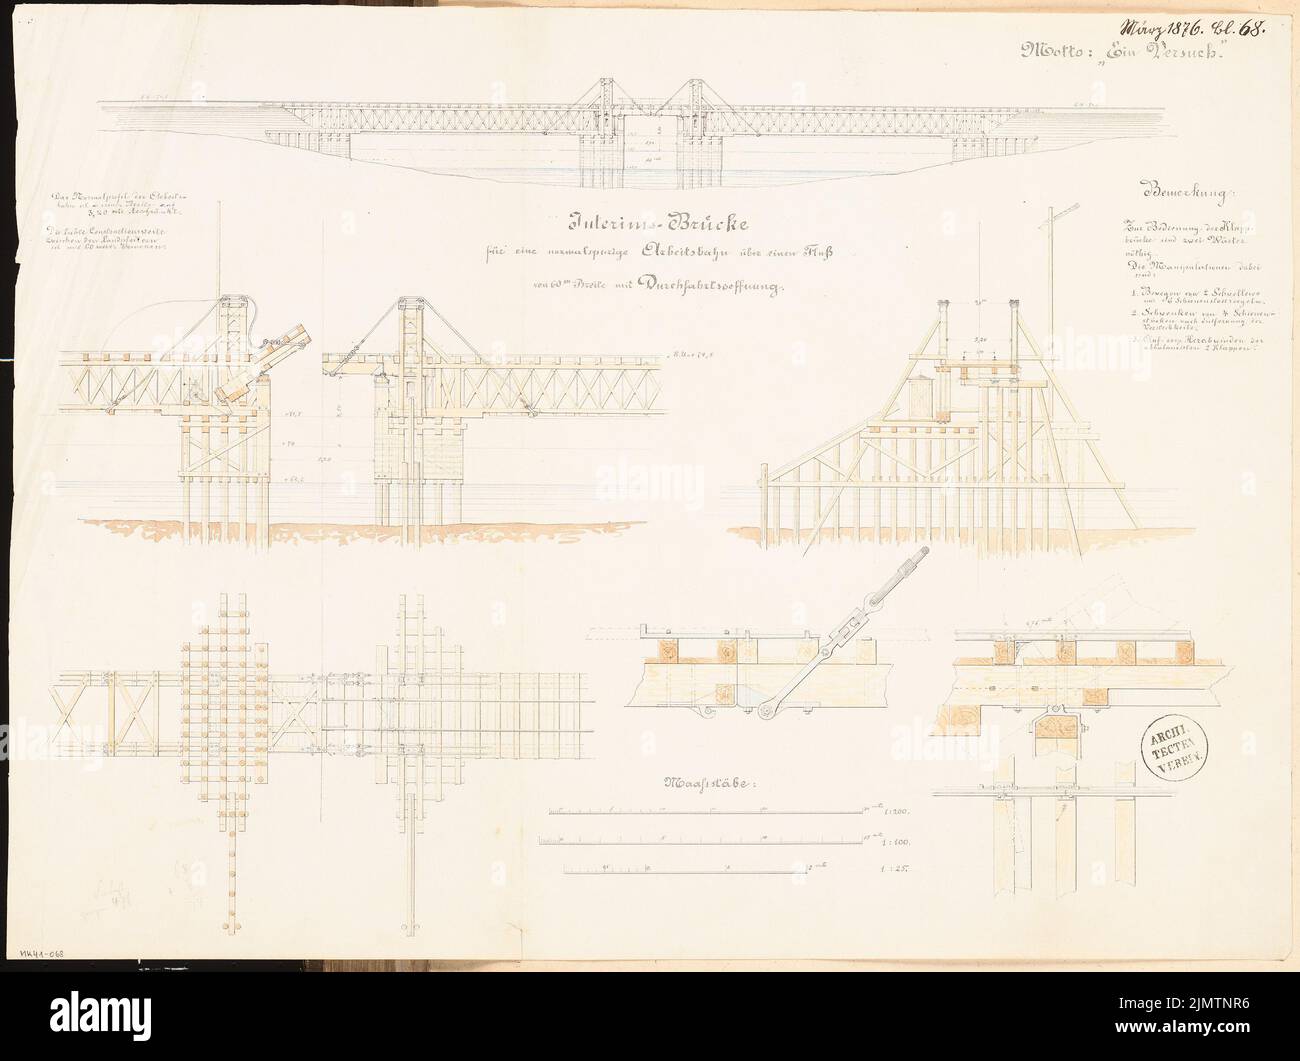 Unknown architect, interim bridge with a passage opening. Monthly competition March 1876 (03.1876): floor plan (2 levels), tear side view, longitudinal section, cross -section, details; 3 scale strips. Tusche watercolor on the box, 47.9 x 64.1 cm (including scan edges) N.N. : Interimsbrücke mit Durchfahrtsöffnung. Monatskonkurrenz März 1876 Stock Photo